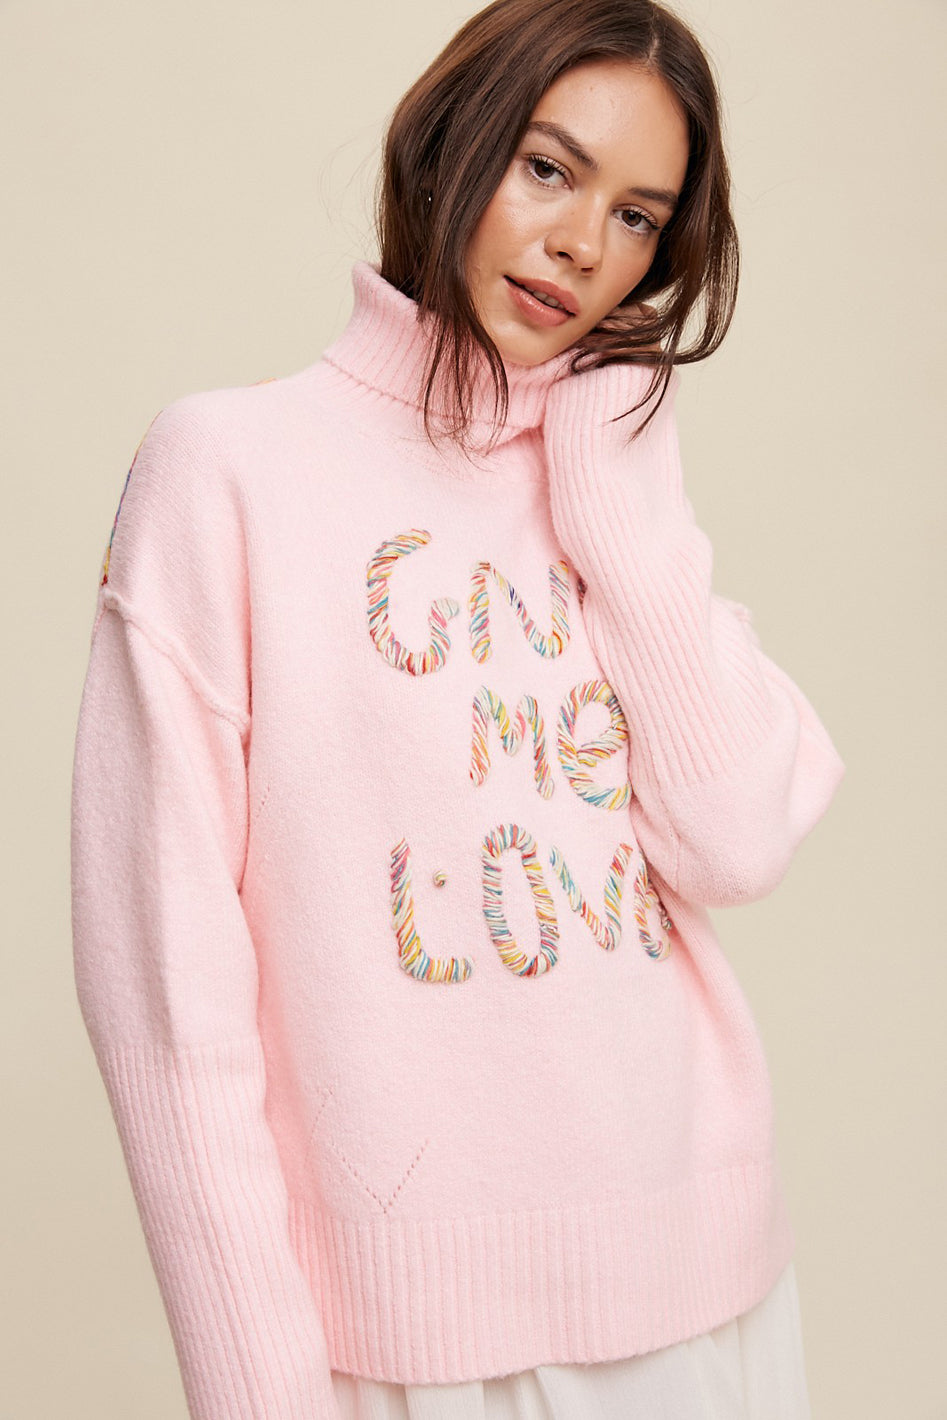 Give Me Love Stitched Mock Neck Sweater - Azoroh